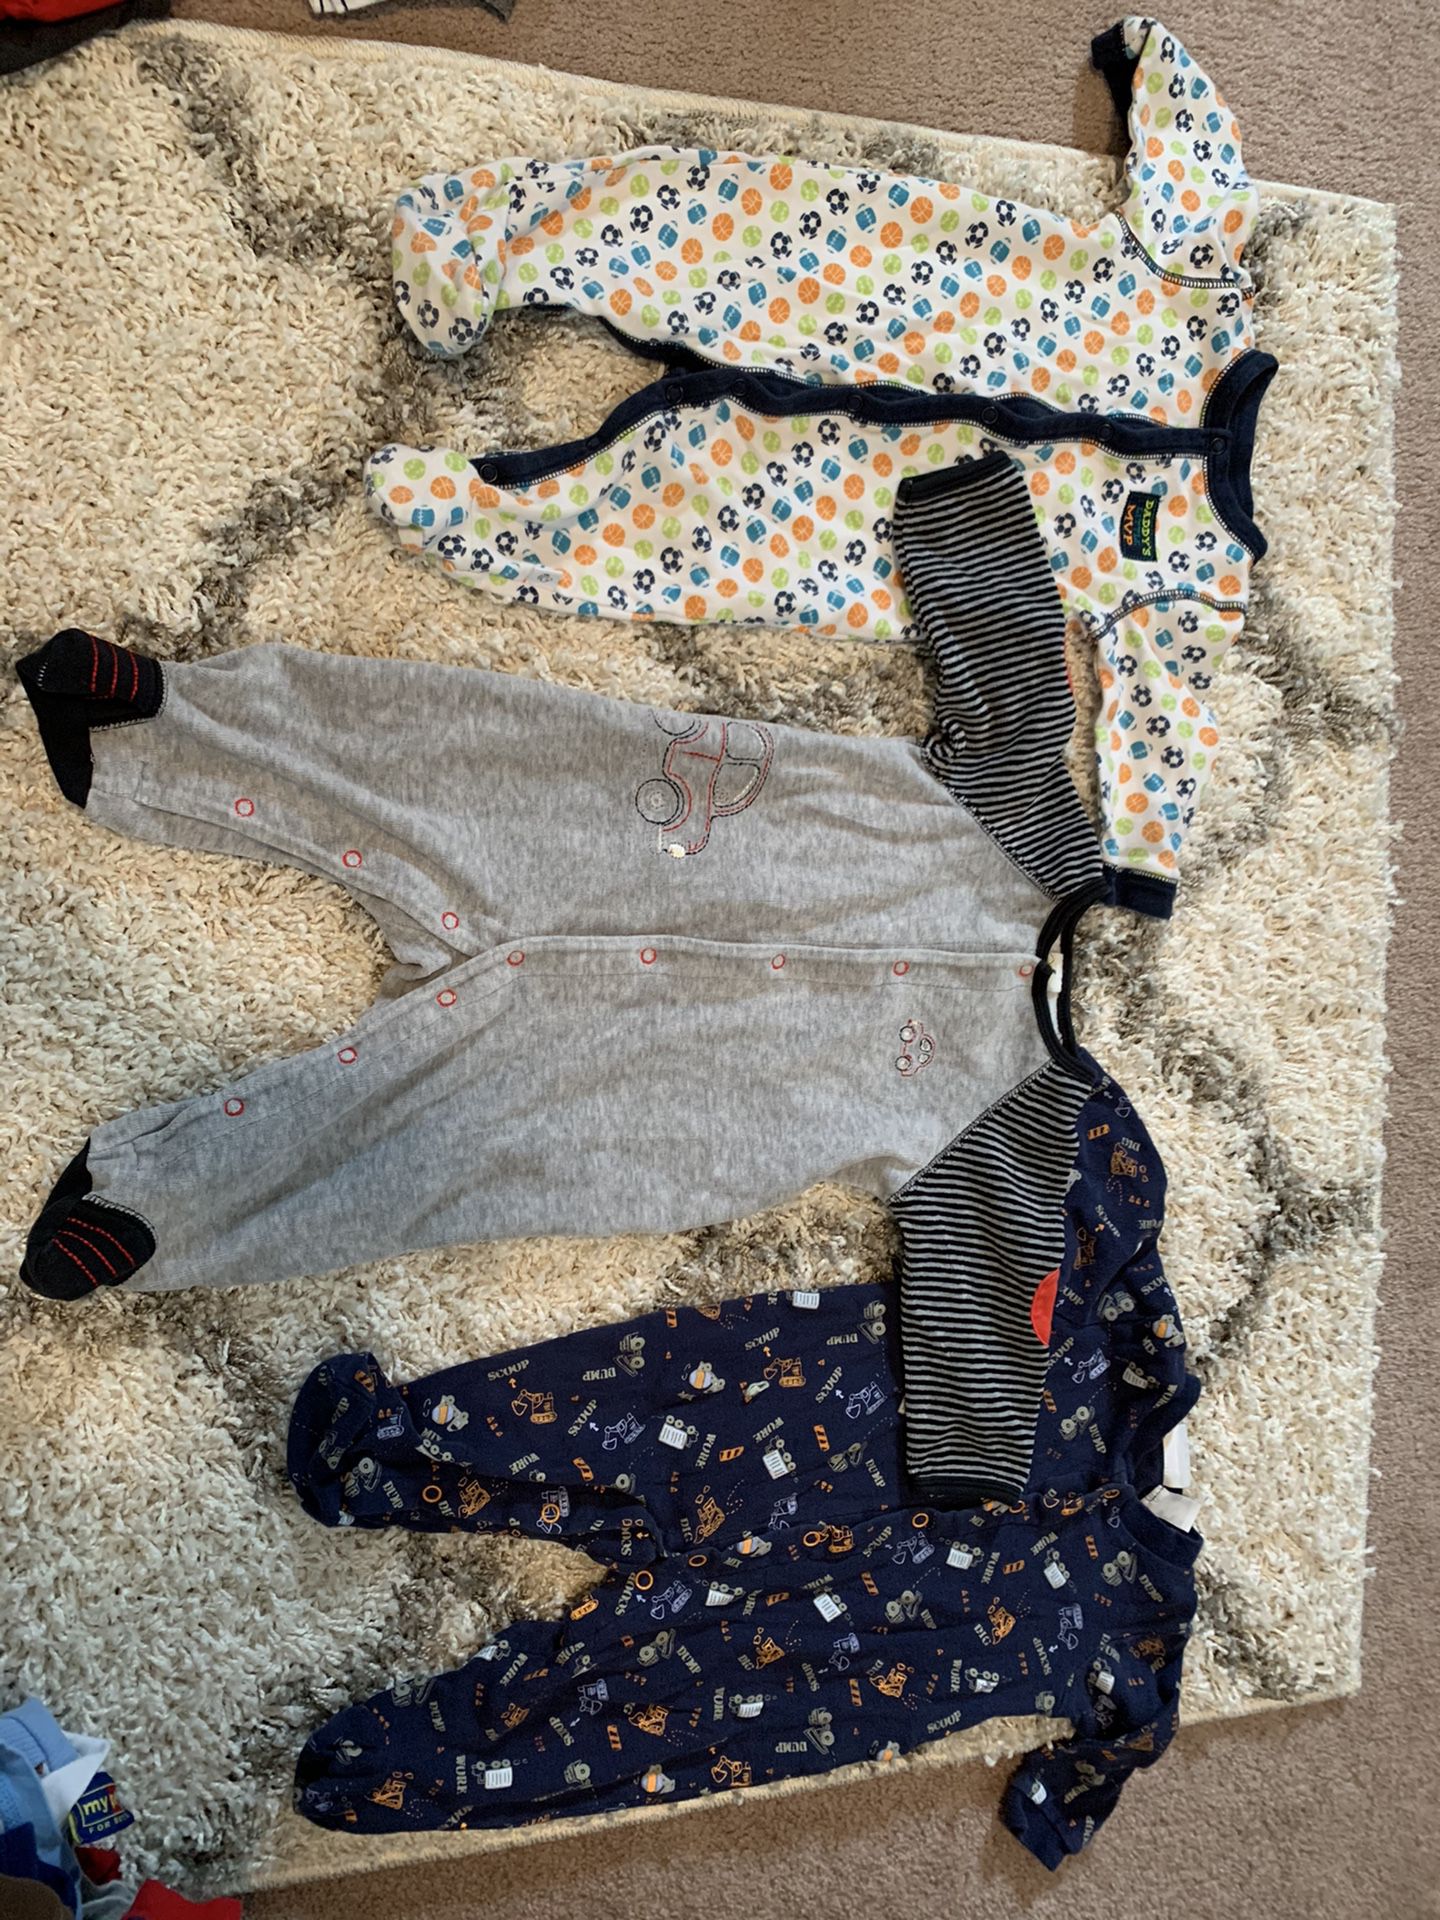 6 month baby clothes